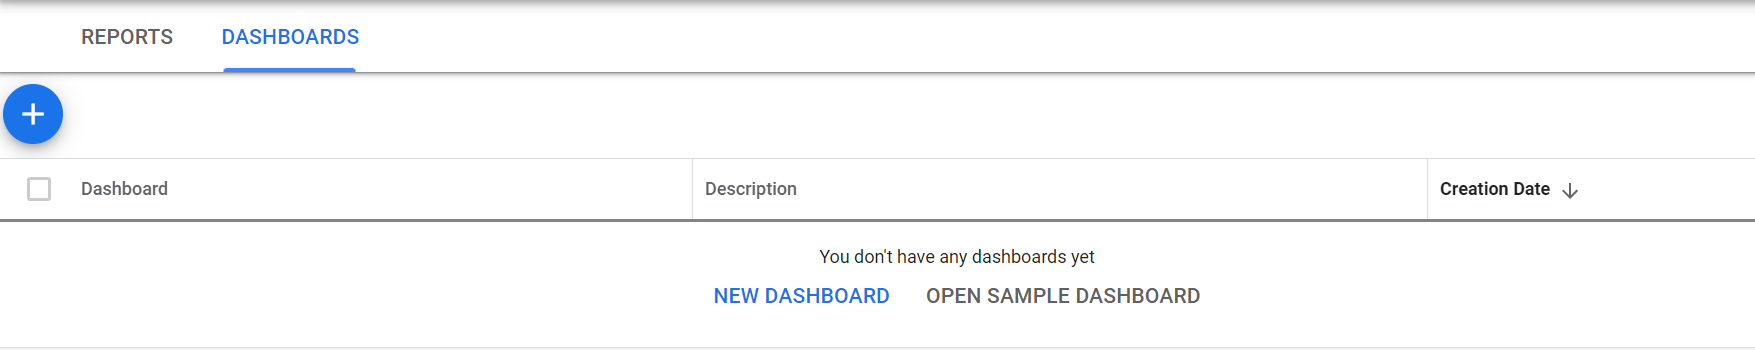 The main page of the MCC-level dashboards created in Google Ads.